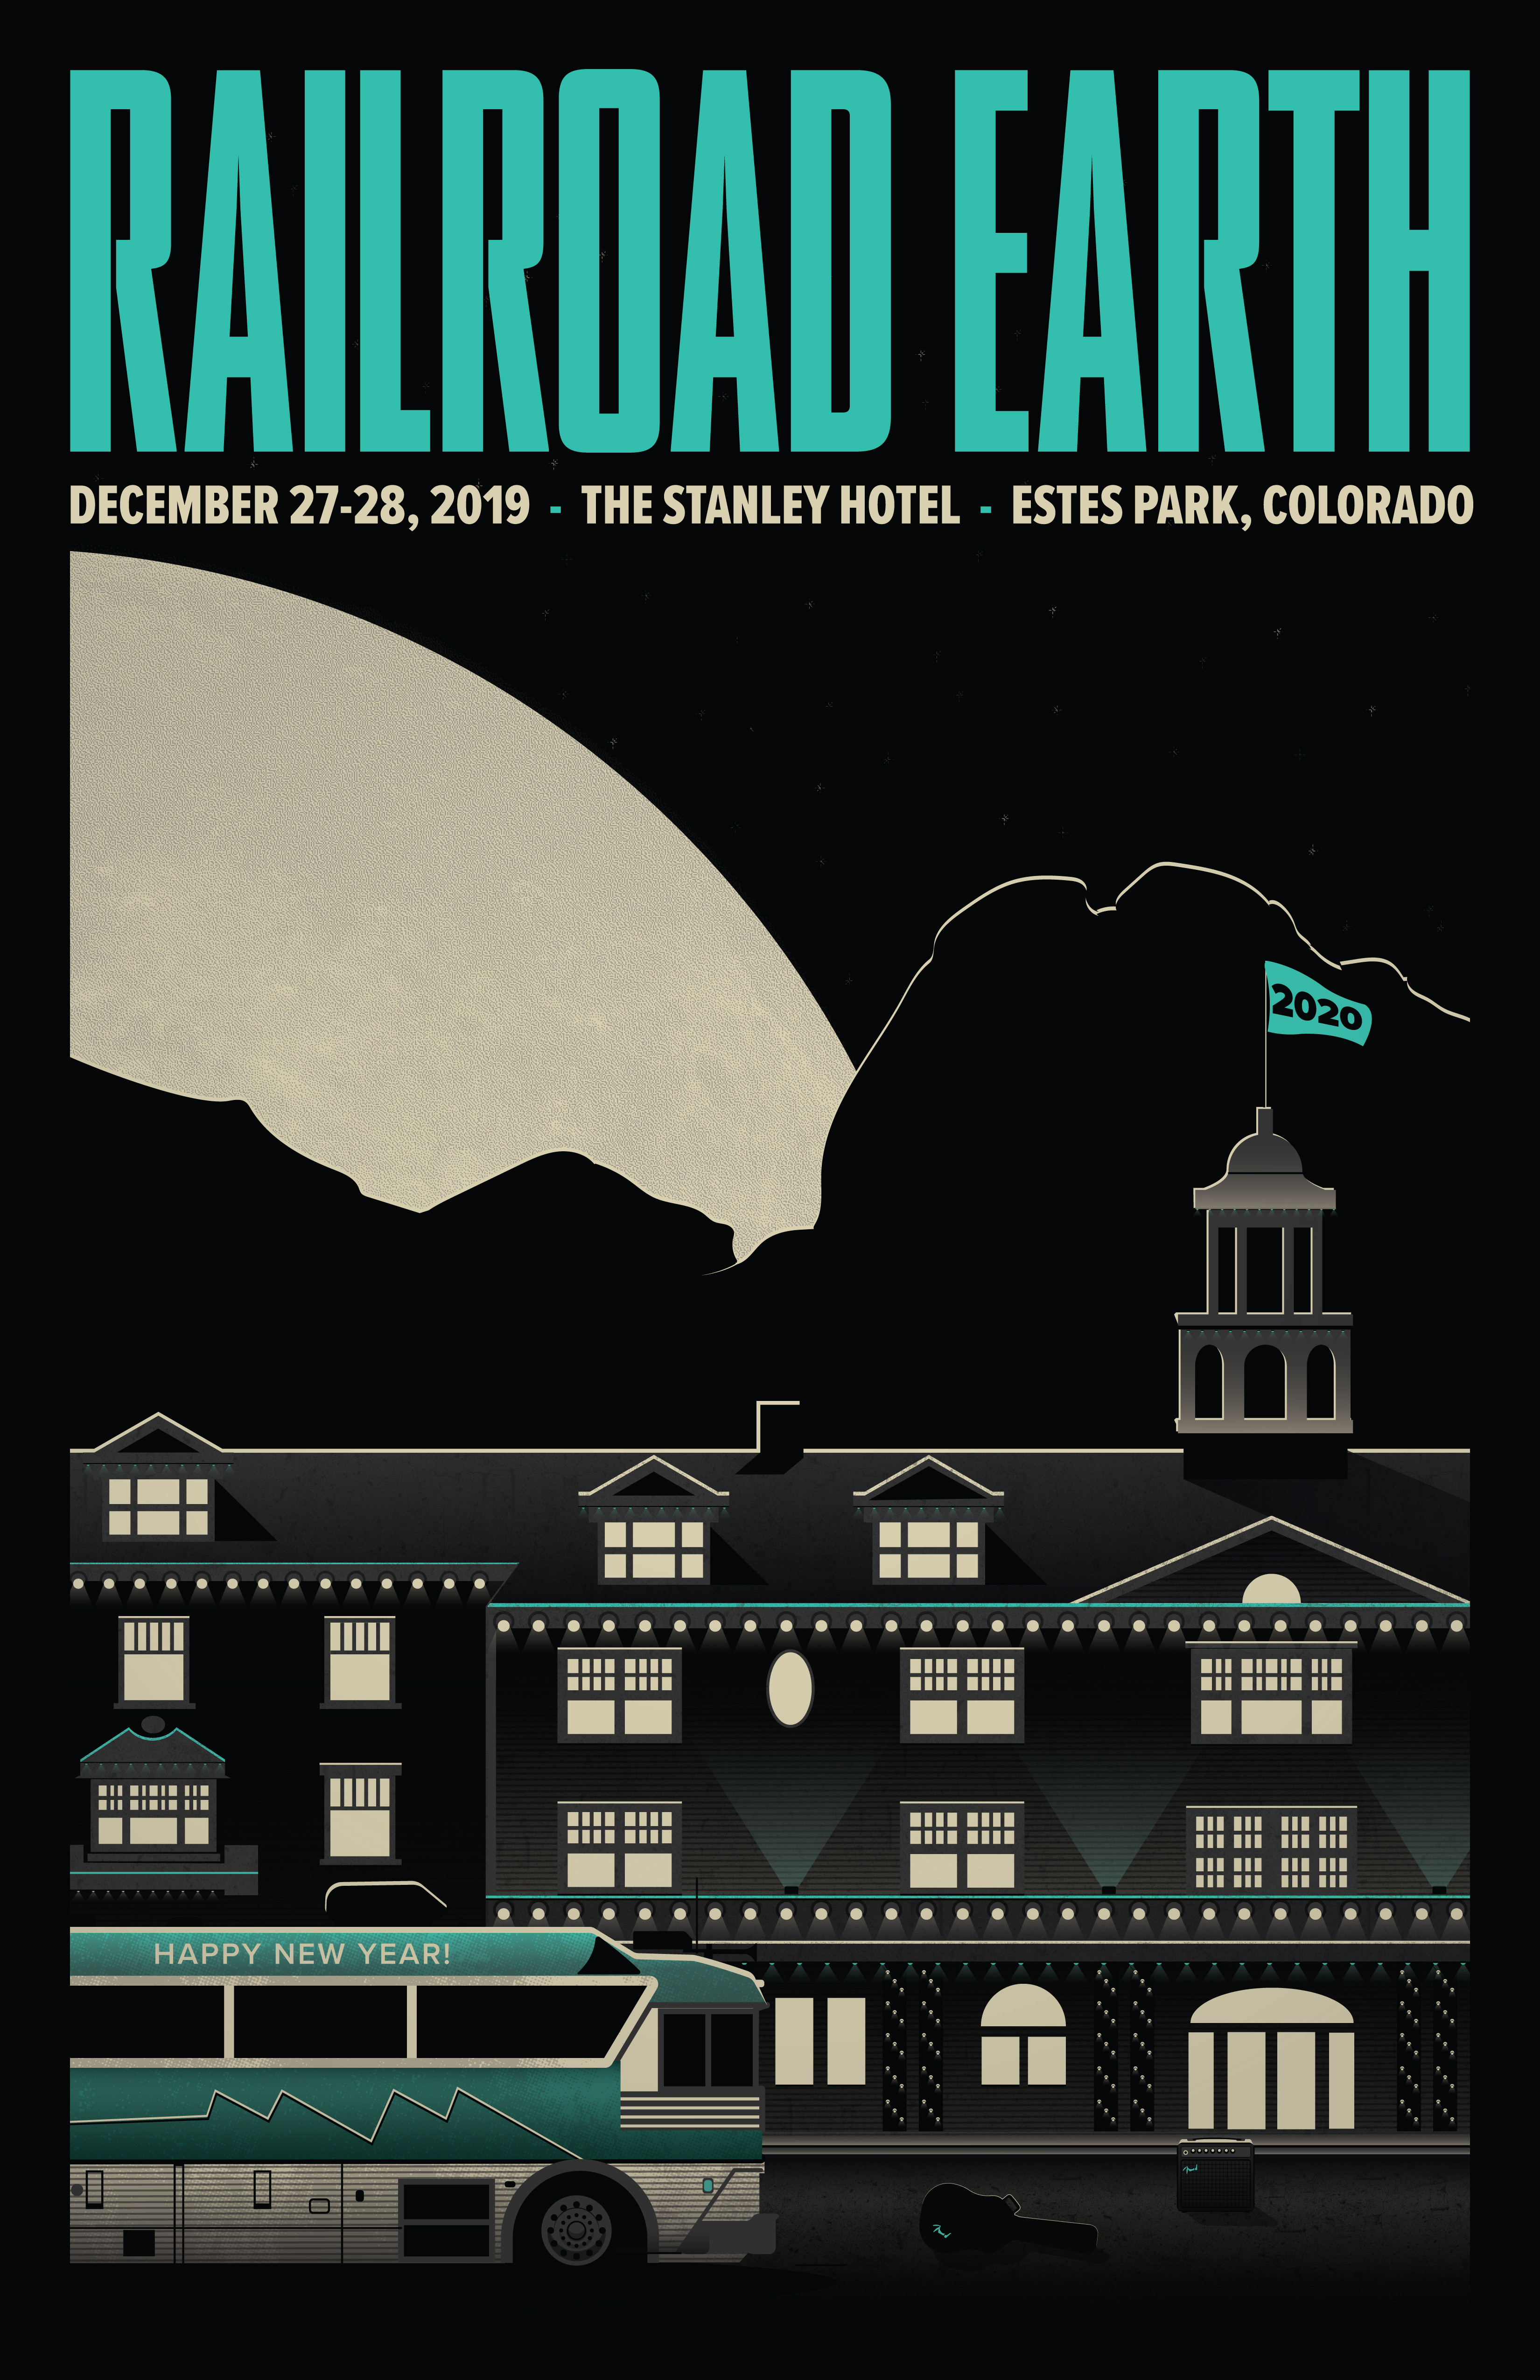 Railroad Earth headlining New Years shows at The Stanley Hotel